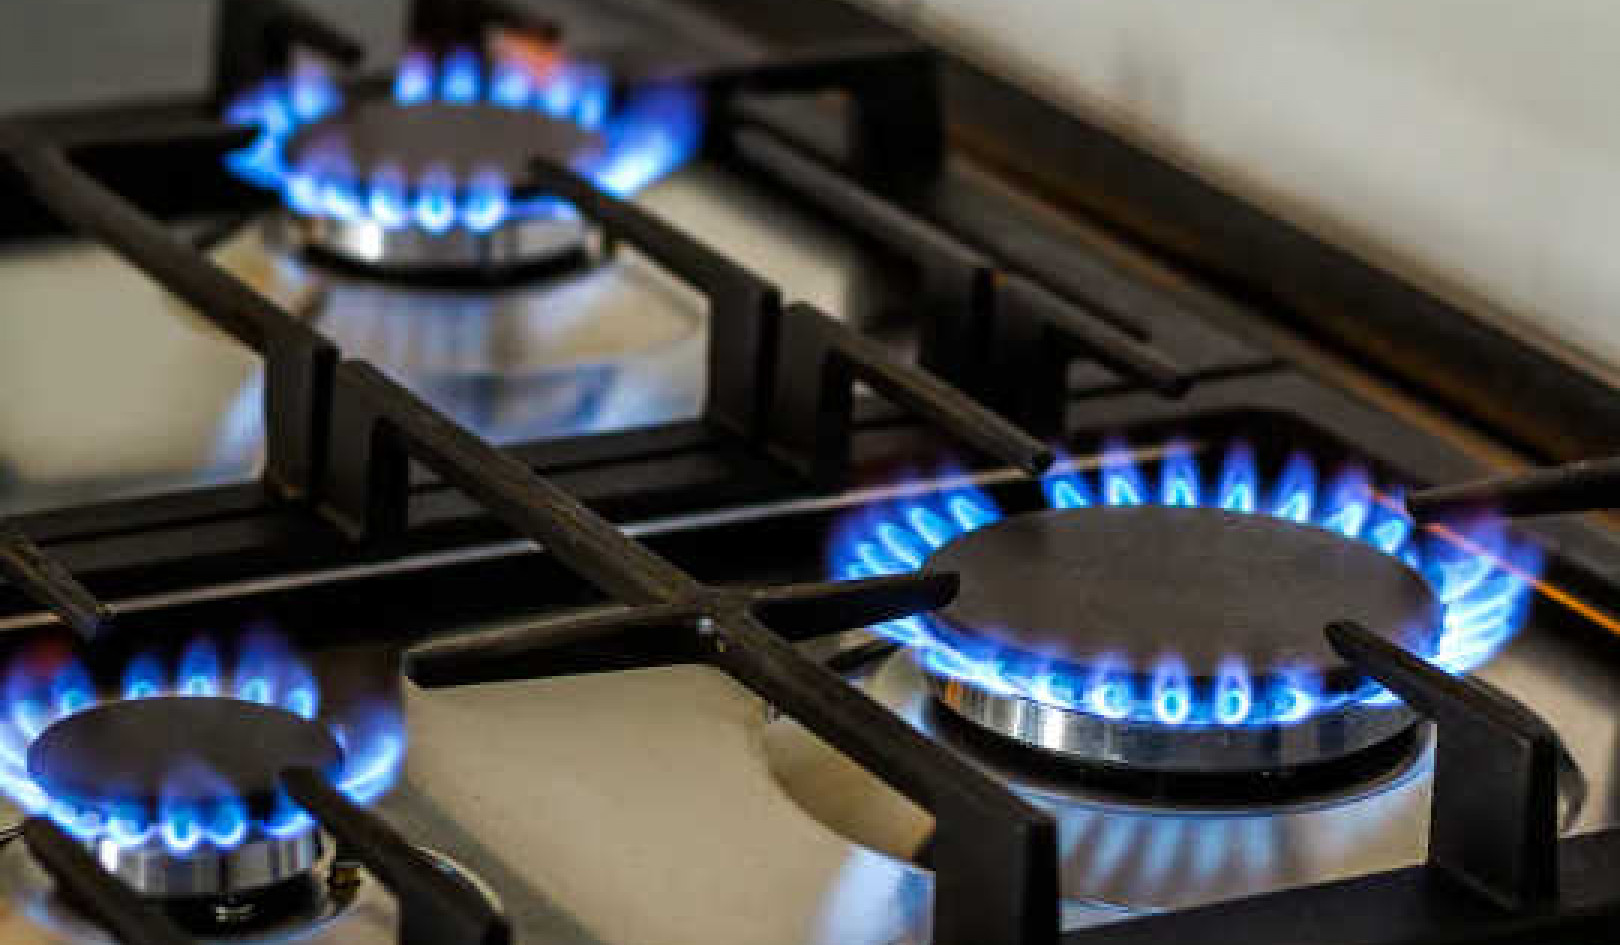 Gas Cooking Is Associated With Worsening Asthma In Kids